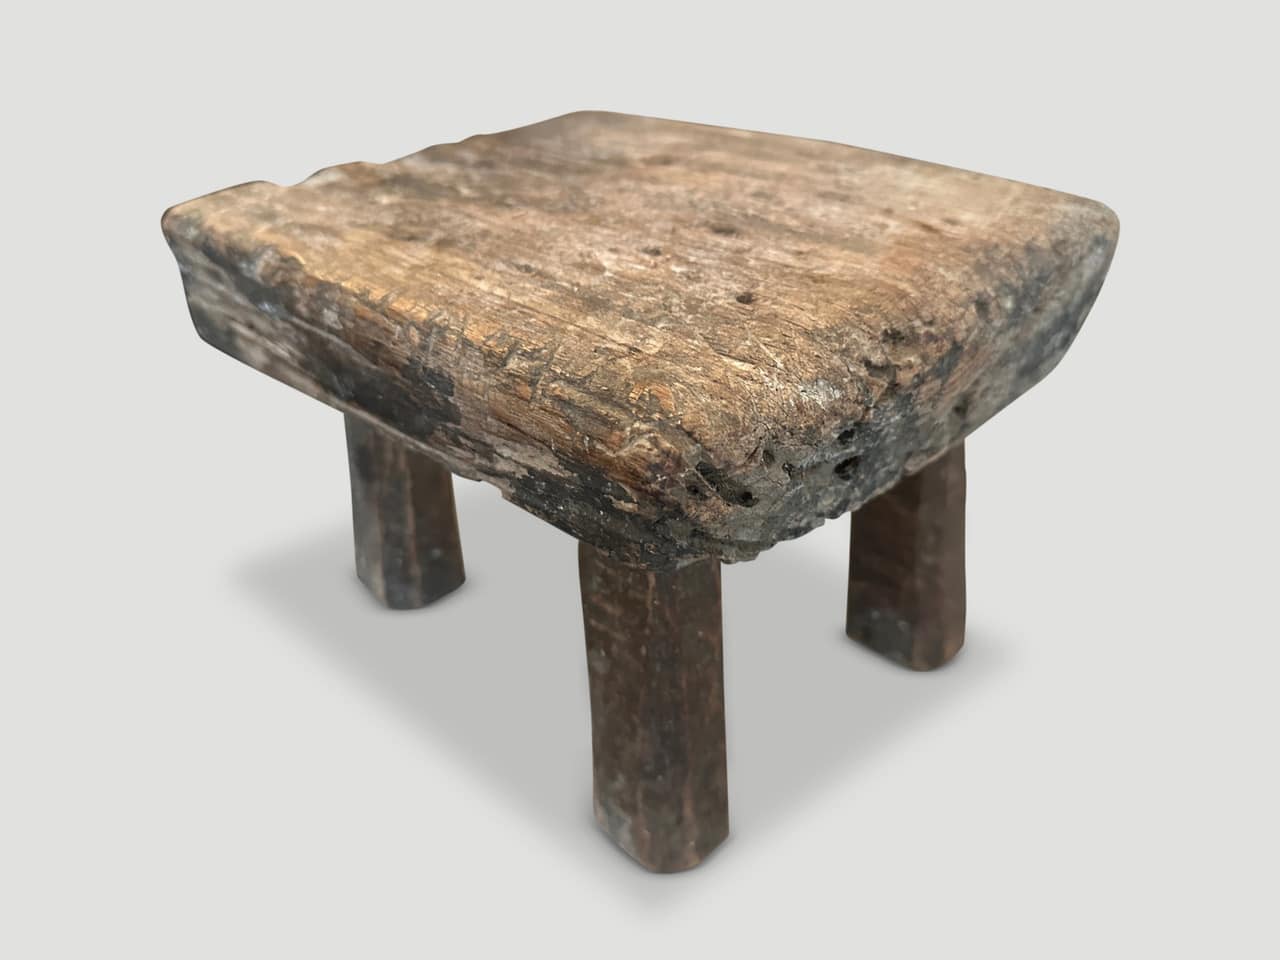 low antique stool or side table